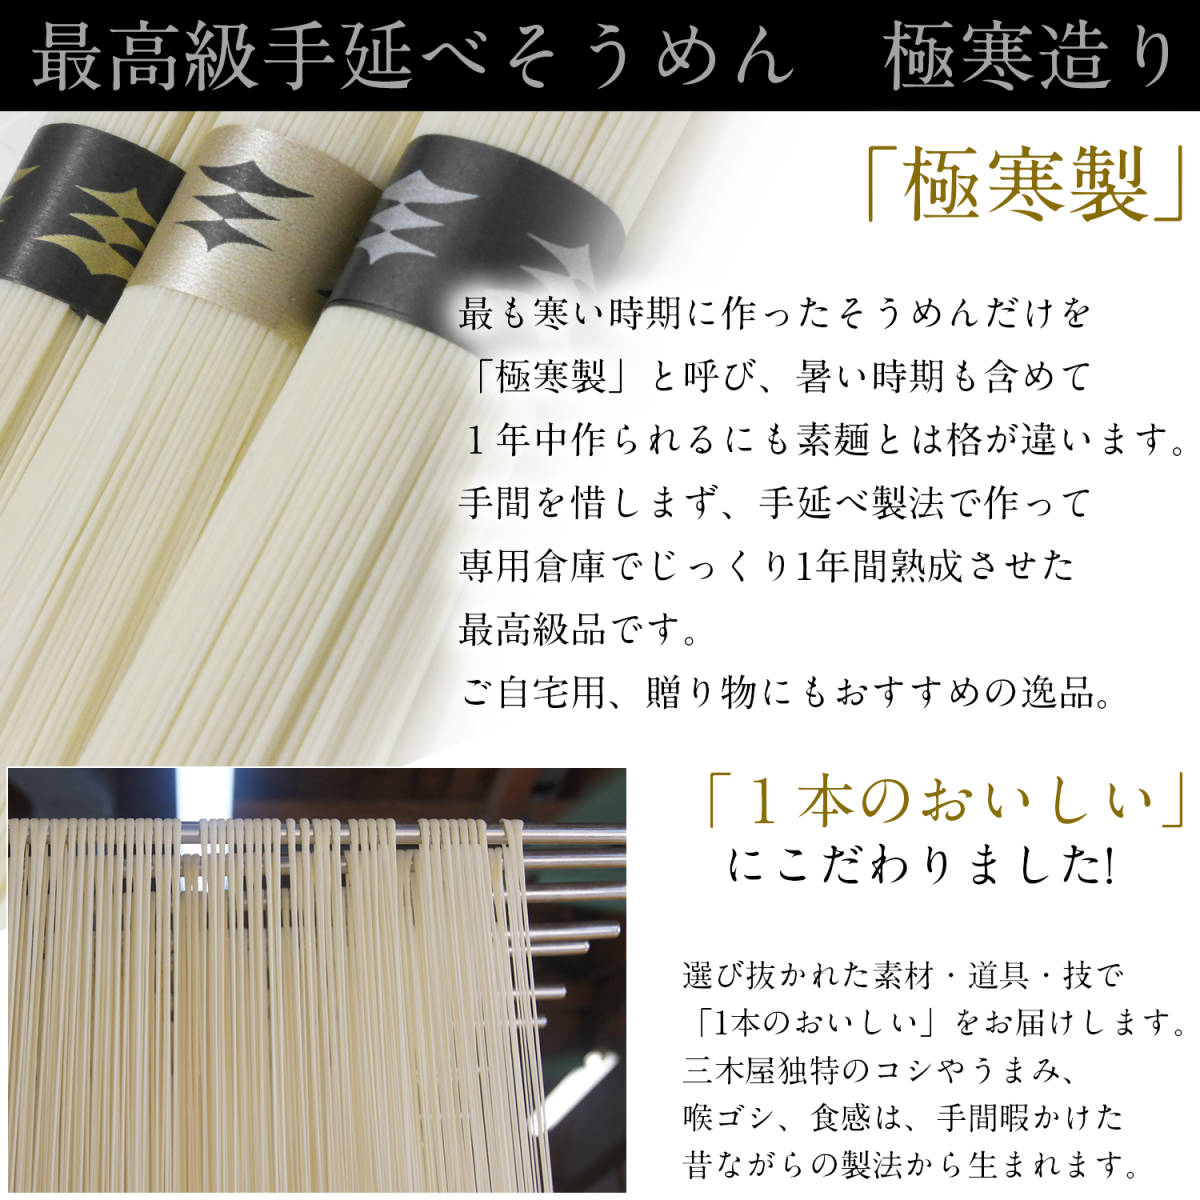  silk .. . woman old thing hand . element noodle super superfine gold obi 12 bundle (50g×4 bundle ×3 sack ) cosmetics tree box vermicelli element noodle saw men .-..so- men . New Year's greetings cold middle see Mai .